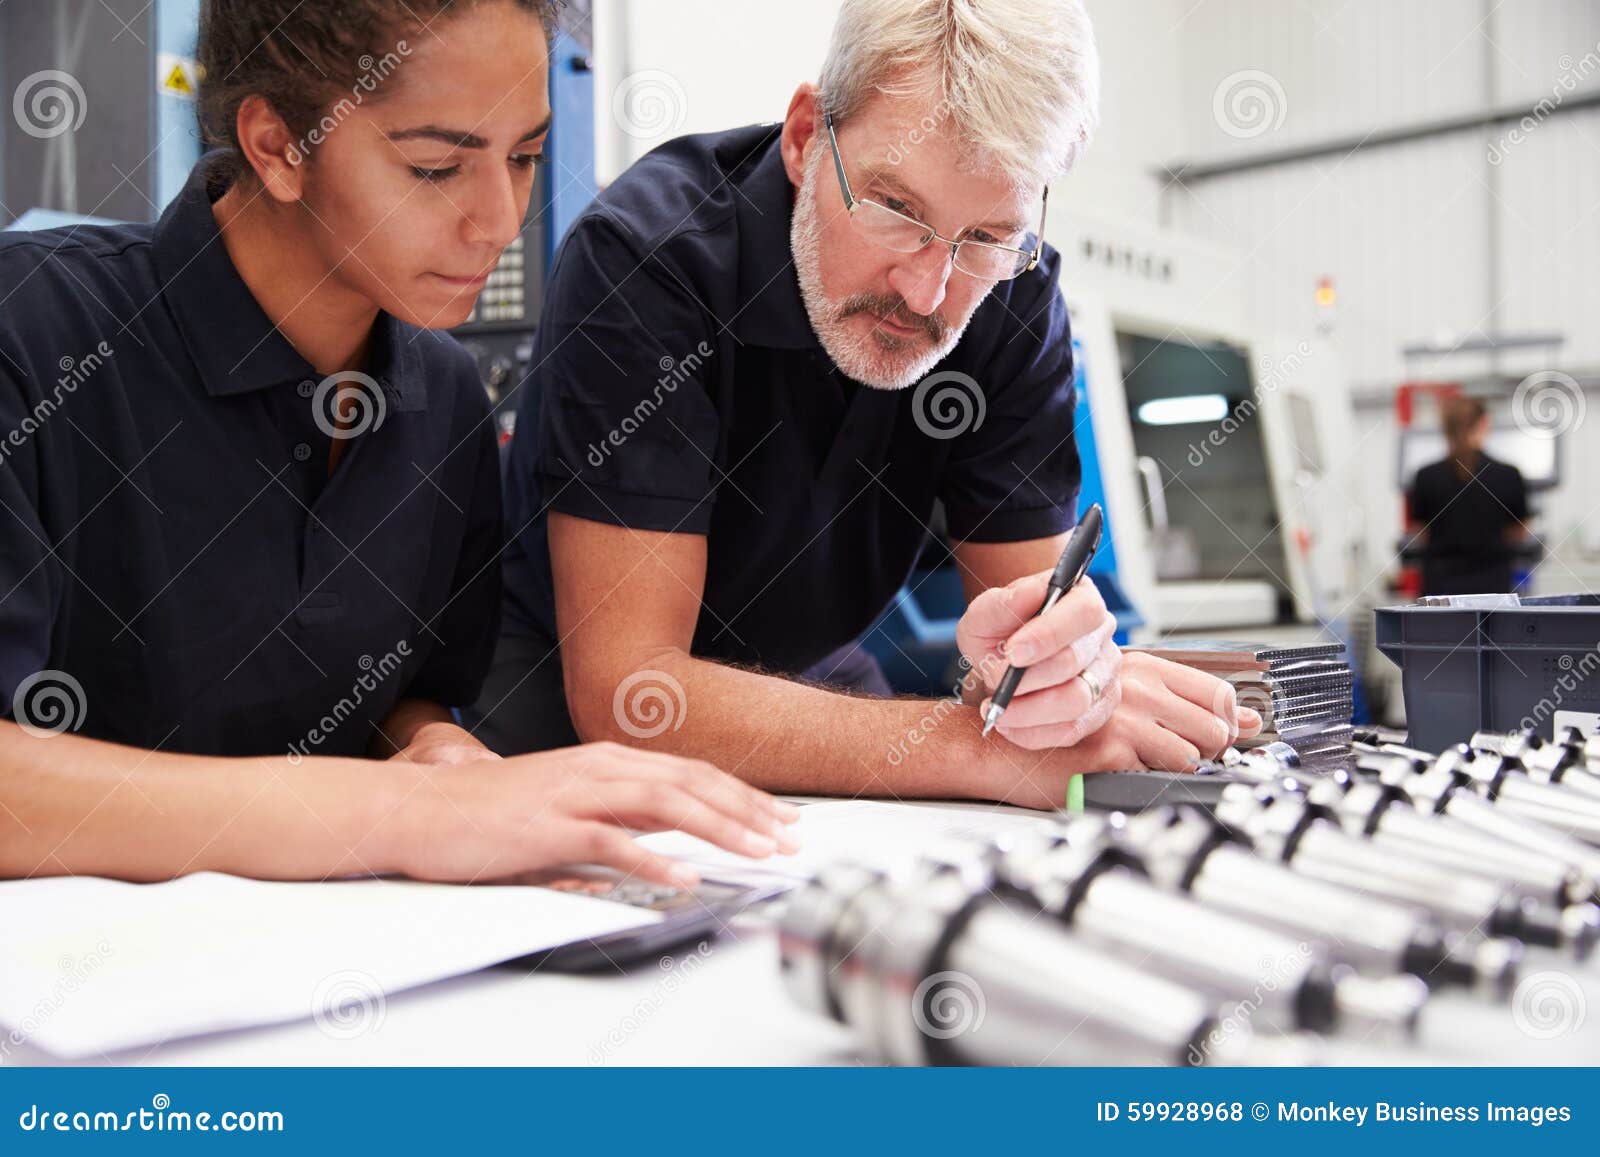 engineer and apprentice planning cnc machinery project